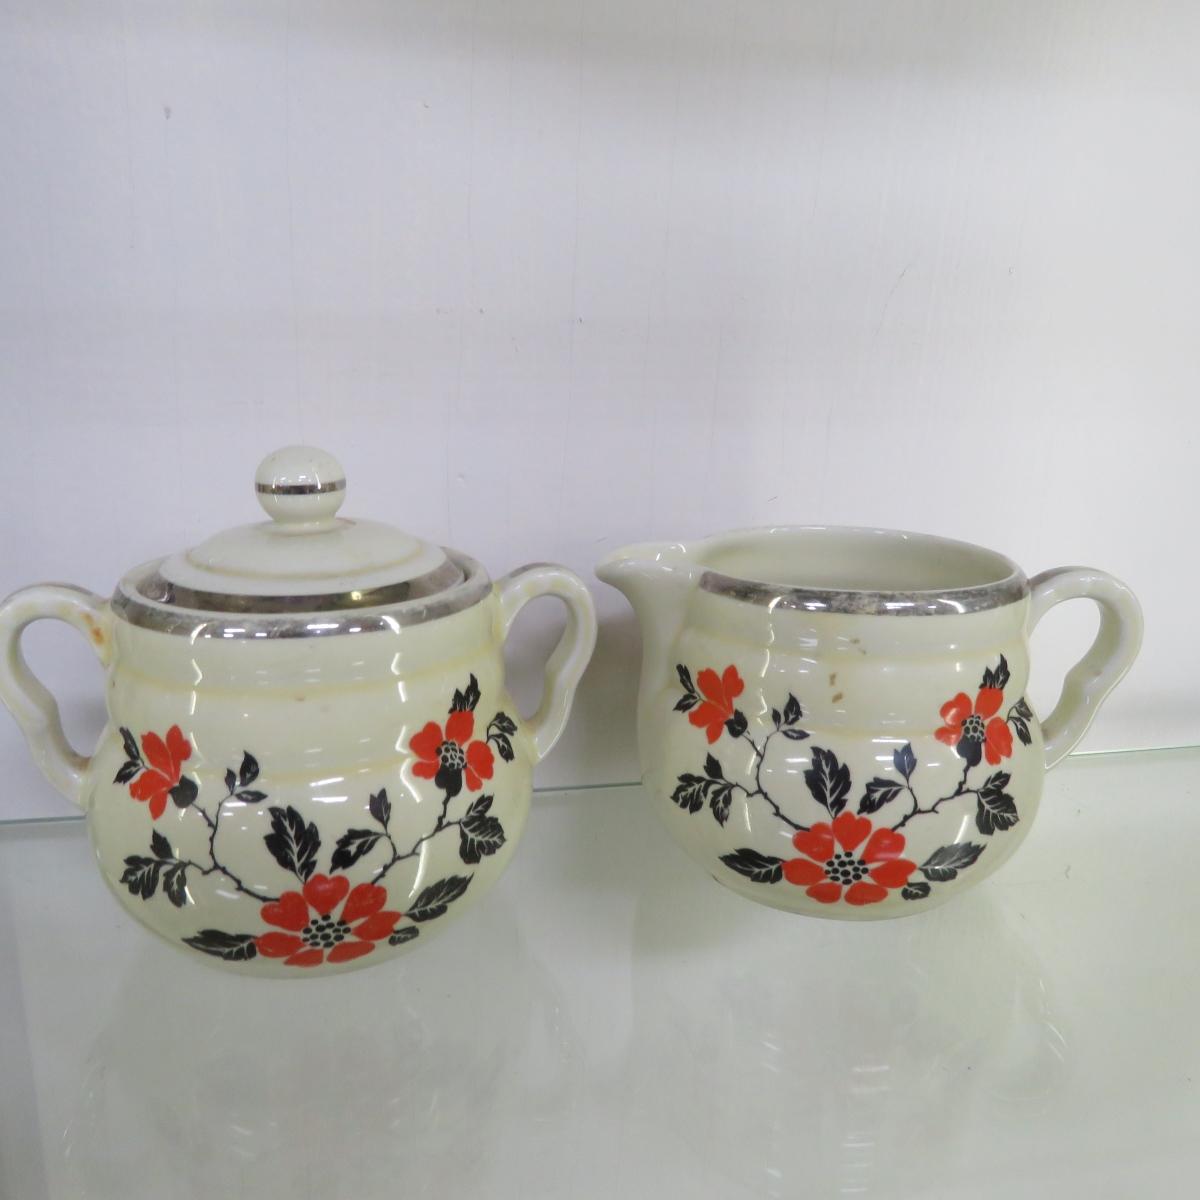 Vintage Hall's Red Poppy Serving Pieces